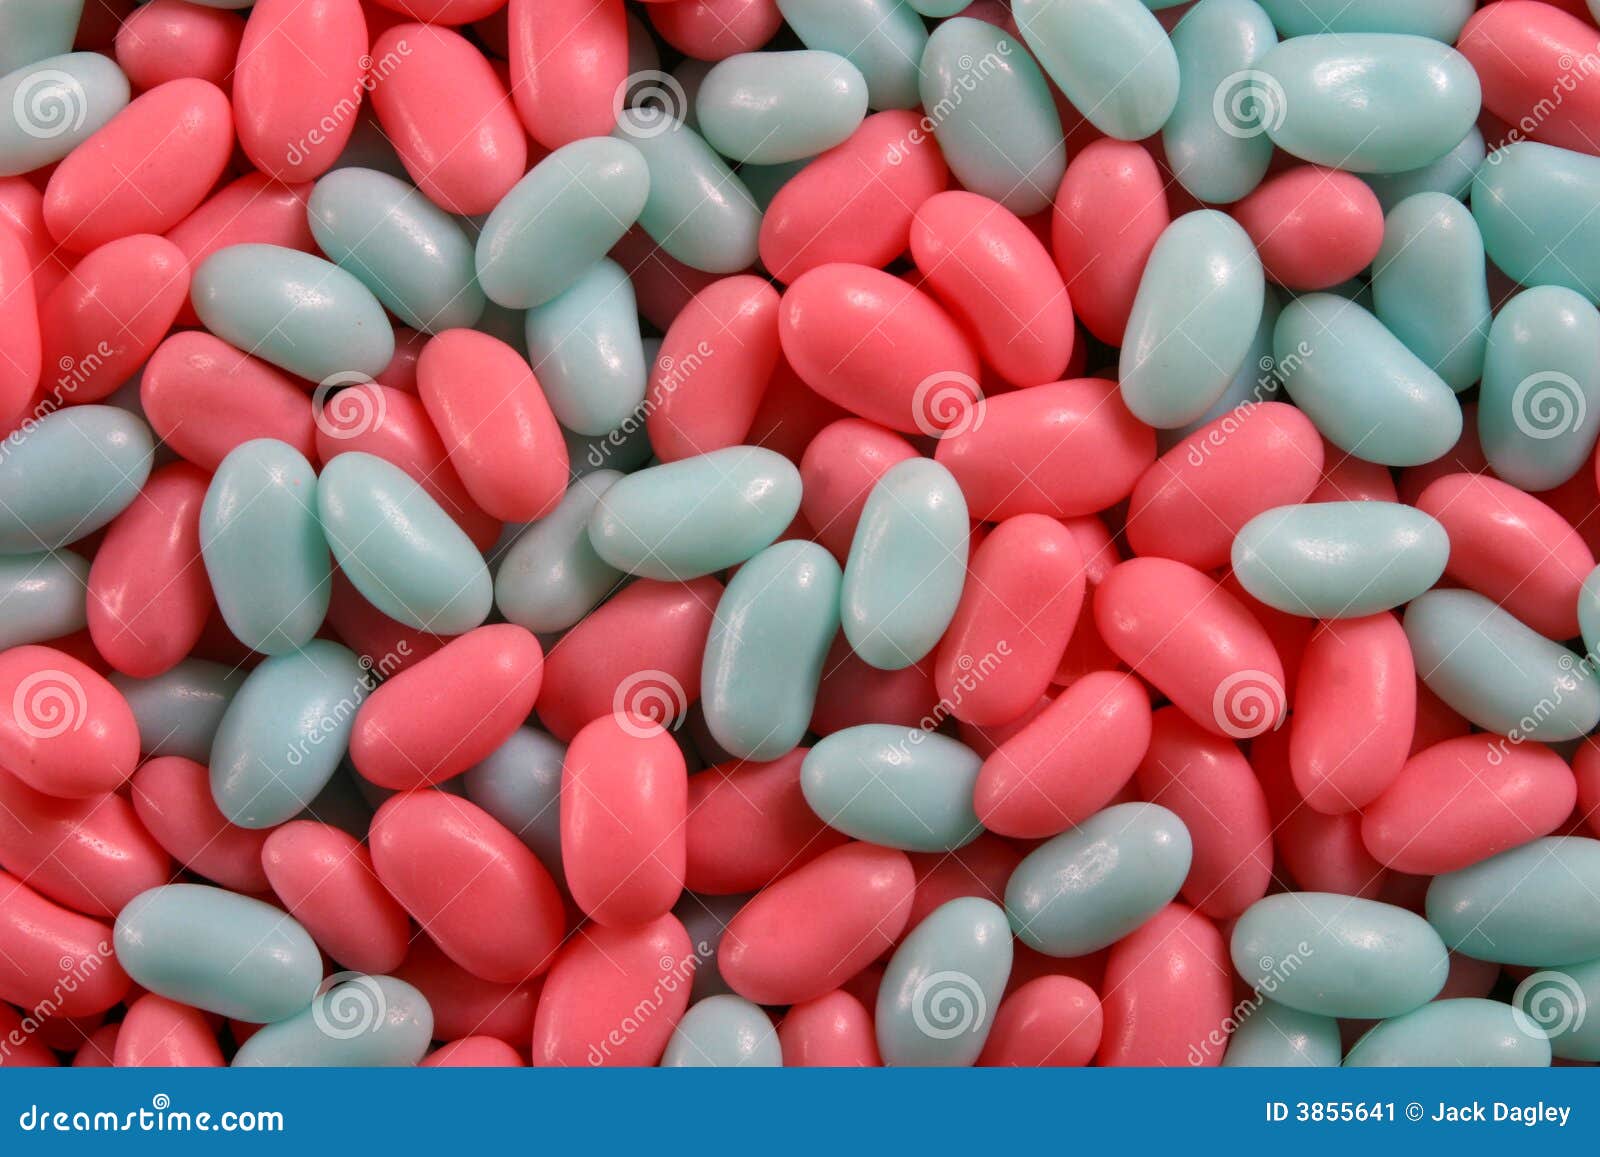 one blue jelly bean